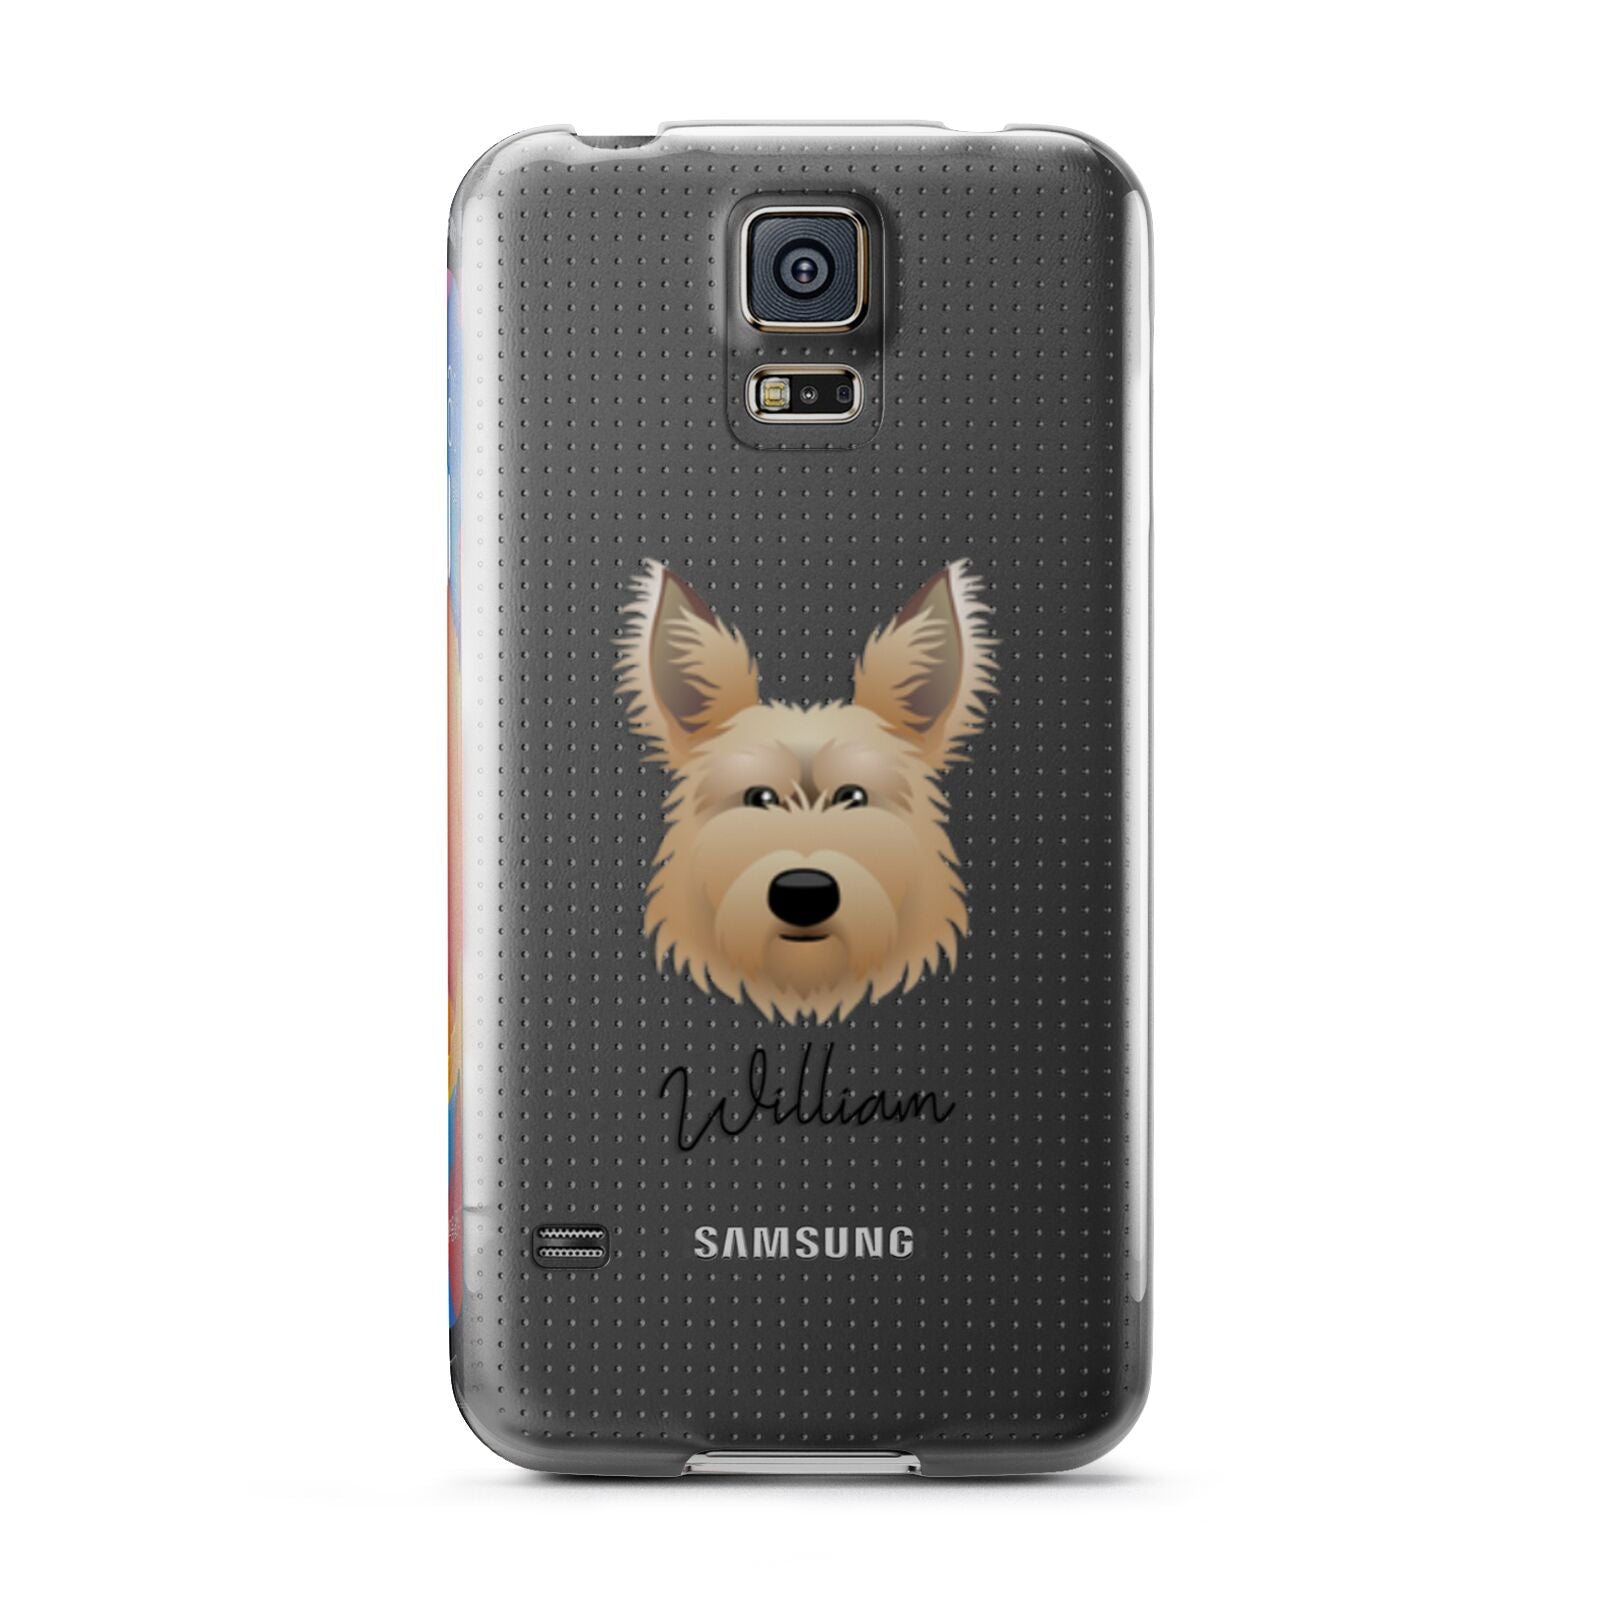 Picardy Sheepdog Personalised Samsung Galaxy S5 Case